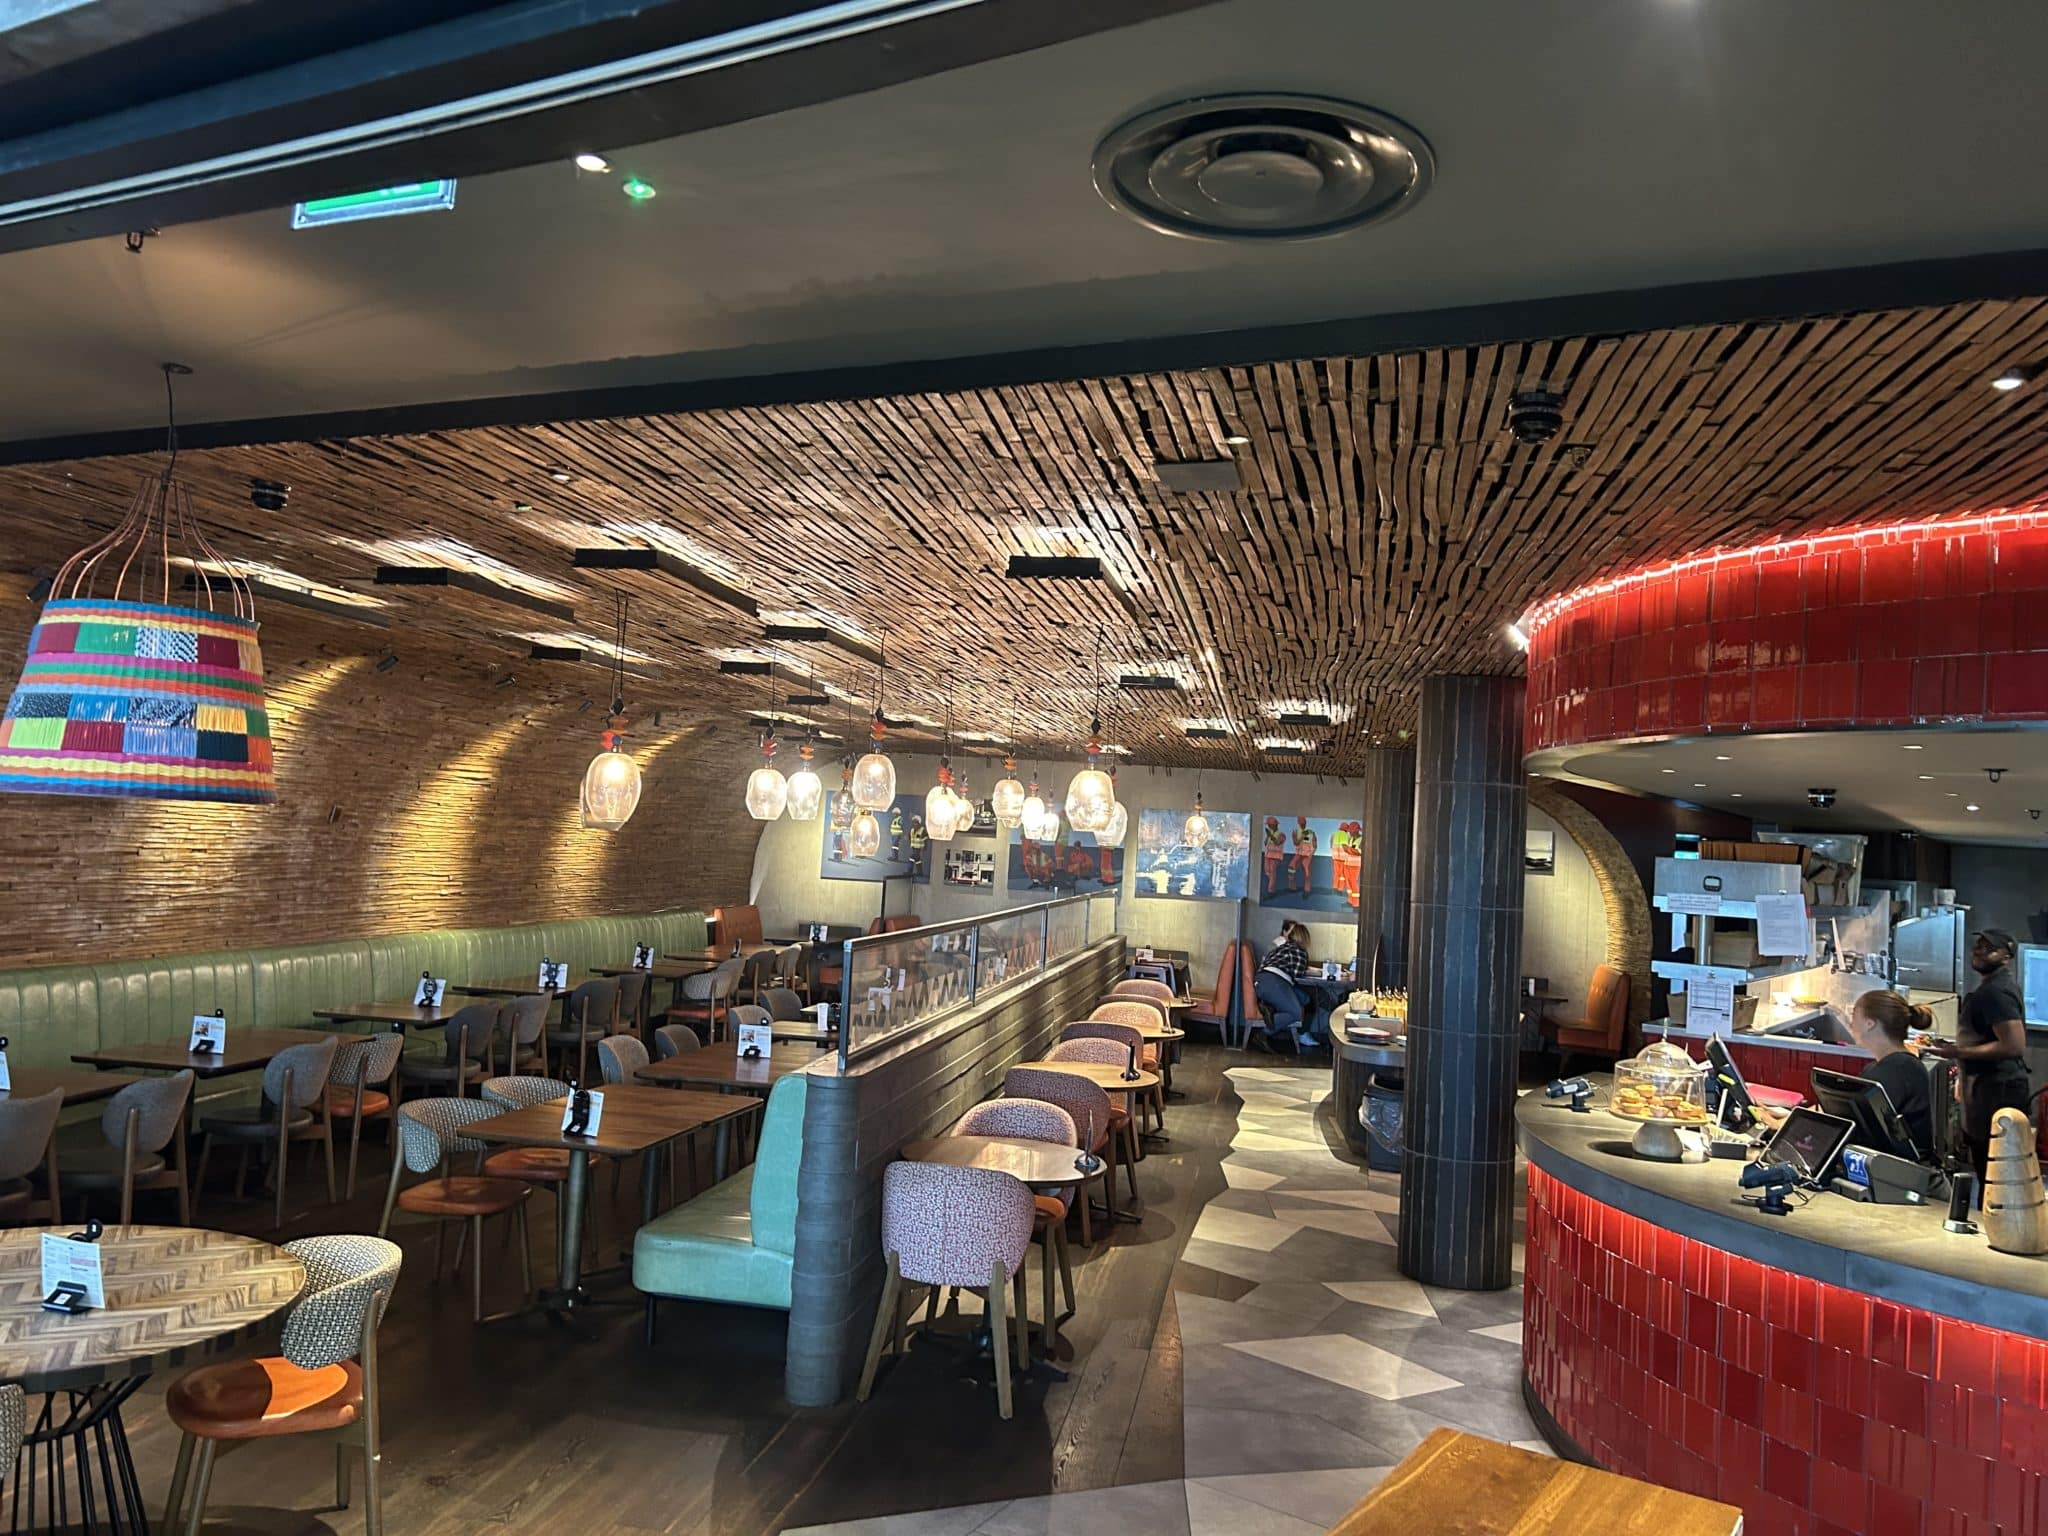 Modern restaurant interior with eclectic décor, featuring a bar area, dining tables, colorful lighting fixtures, and extra services including EV chargers.